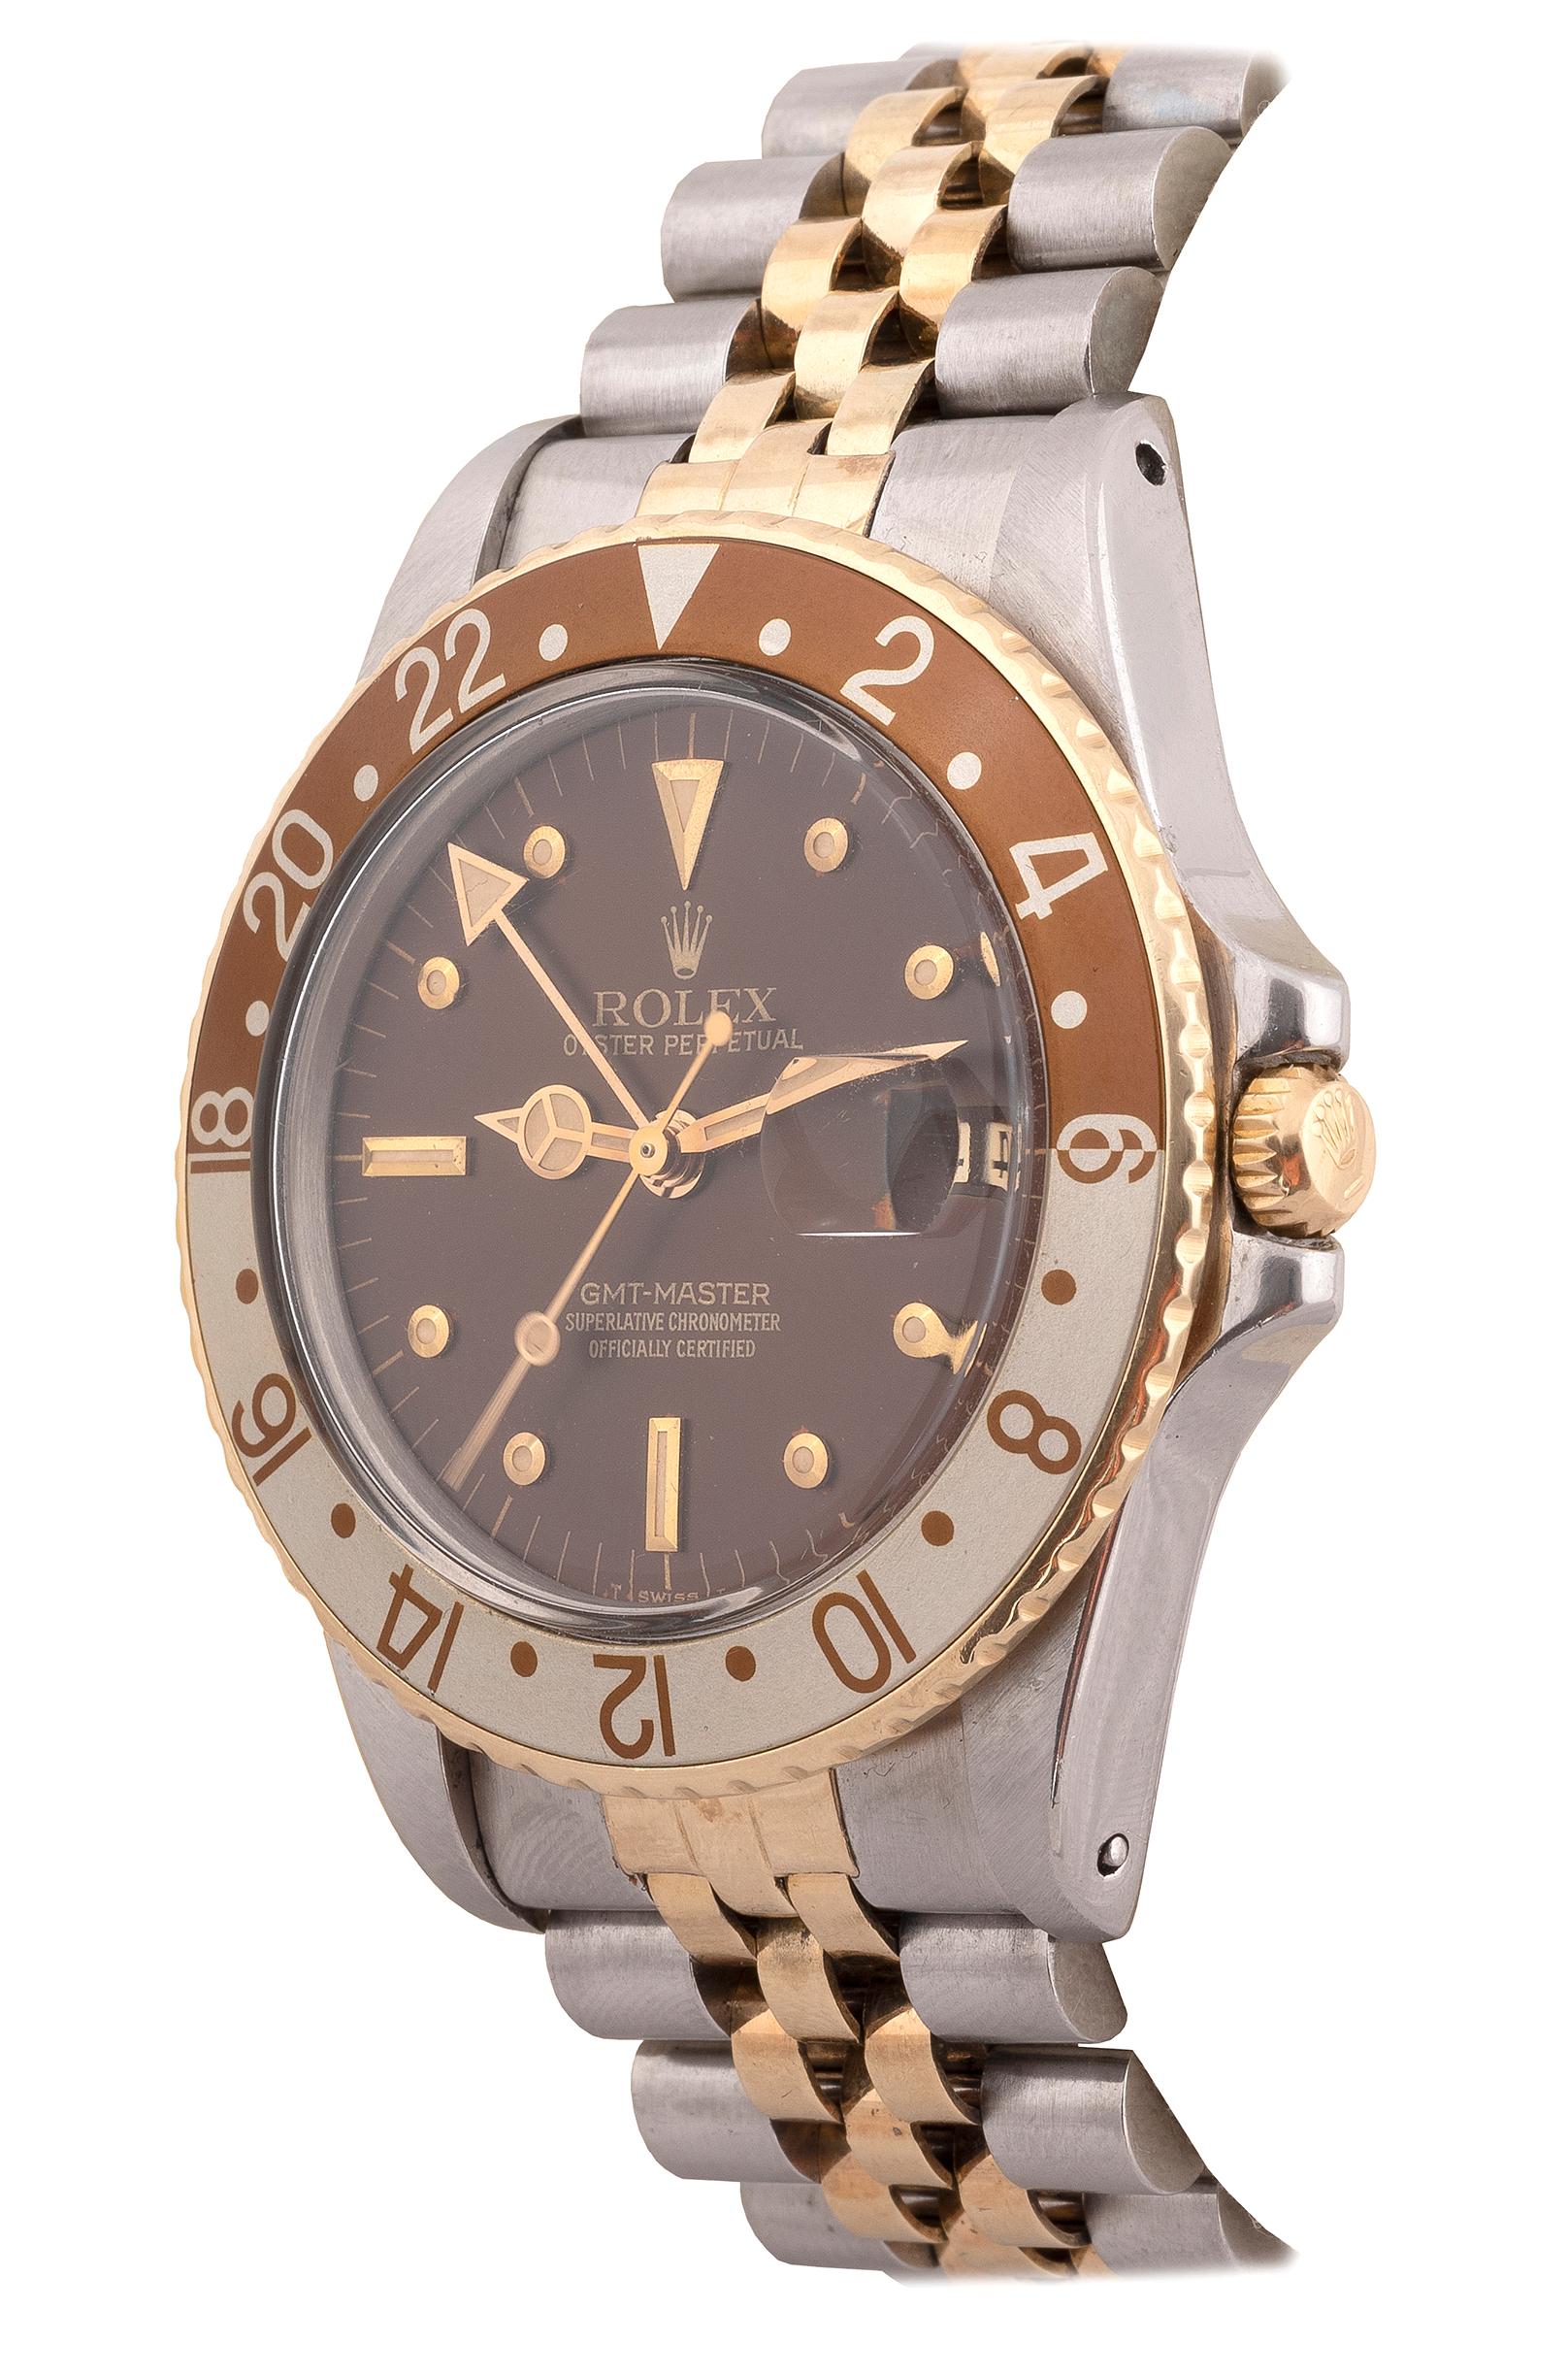 Made in 1980. Very fine, two time zone, center seconds, self-winding, water-resistant, stainless steel and 18K yellow gold Chronometer wristwatch with date, 24-hour bezel and hand and a stainless steel and 18K yellow gold Rolex Jubilee bracelet with